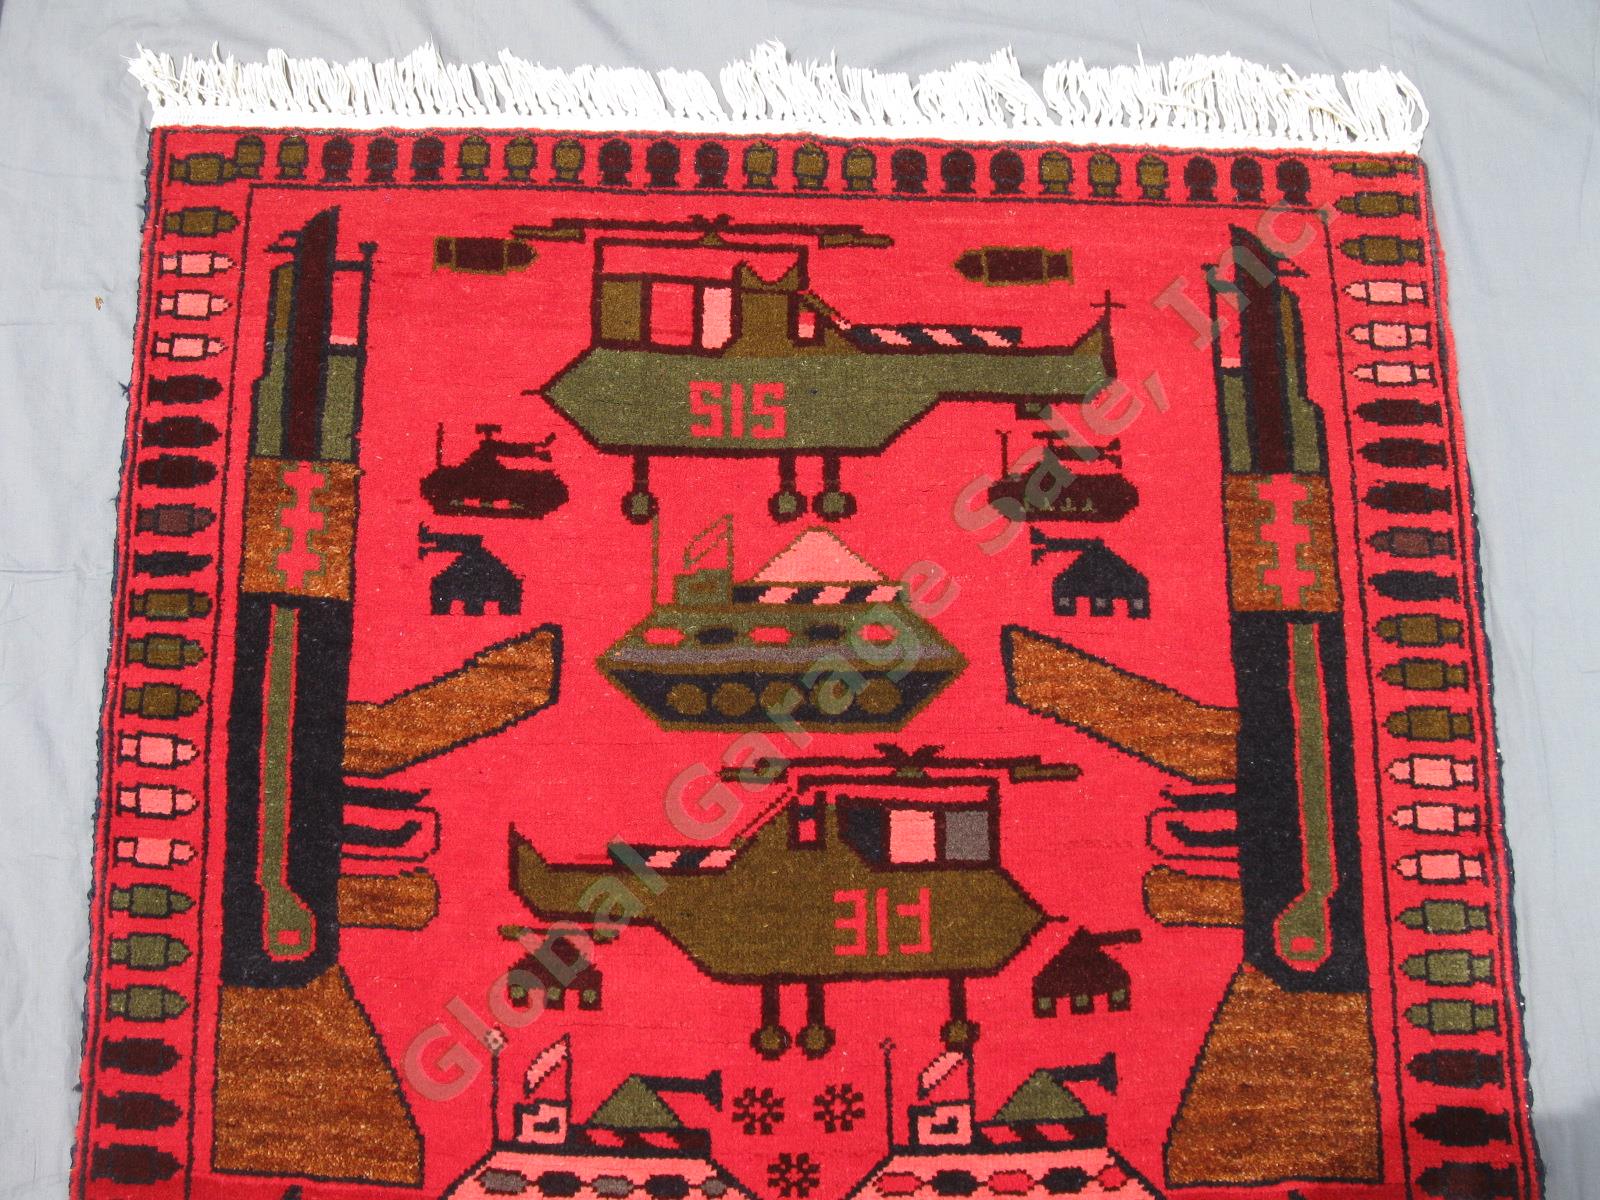 Authentic Afghan Tribal War Rug Circa 2007 Tanks Helicopters AK-47 38.5"x60" NR 1